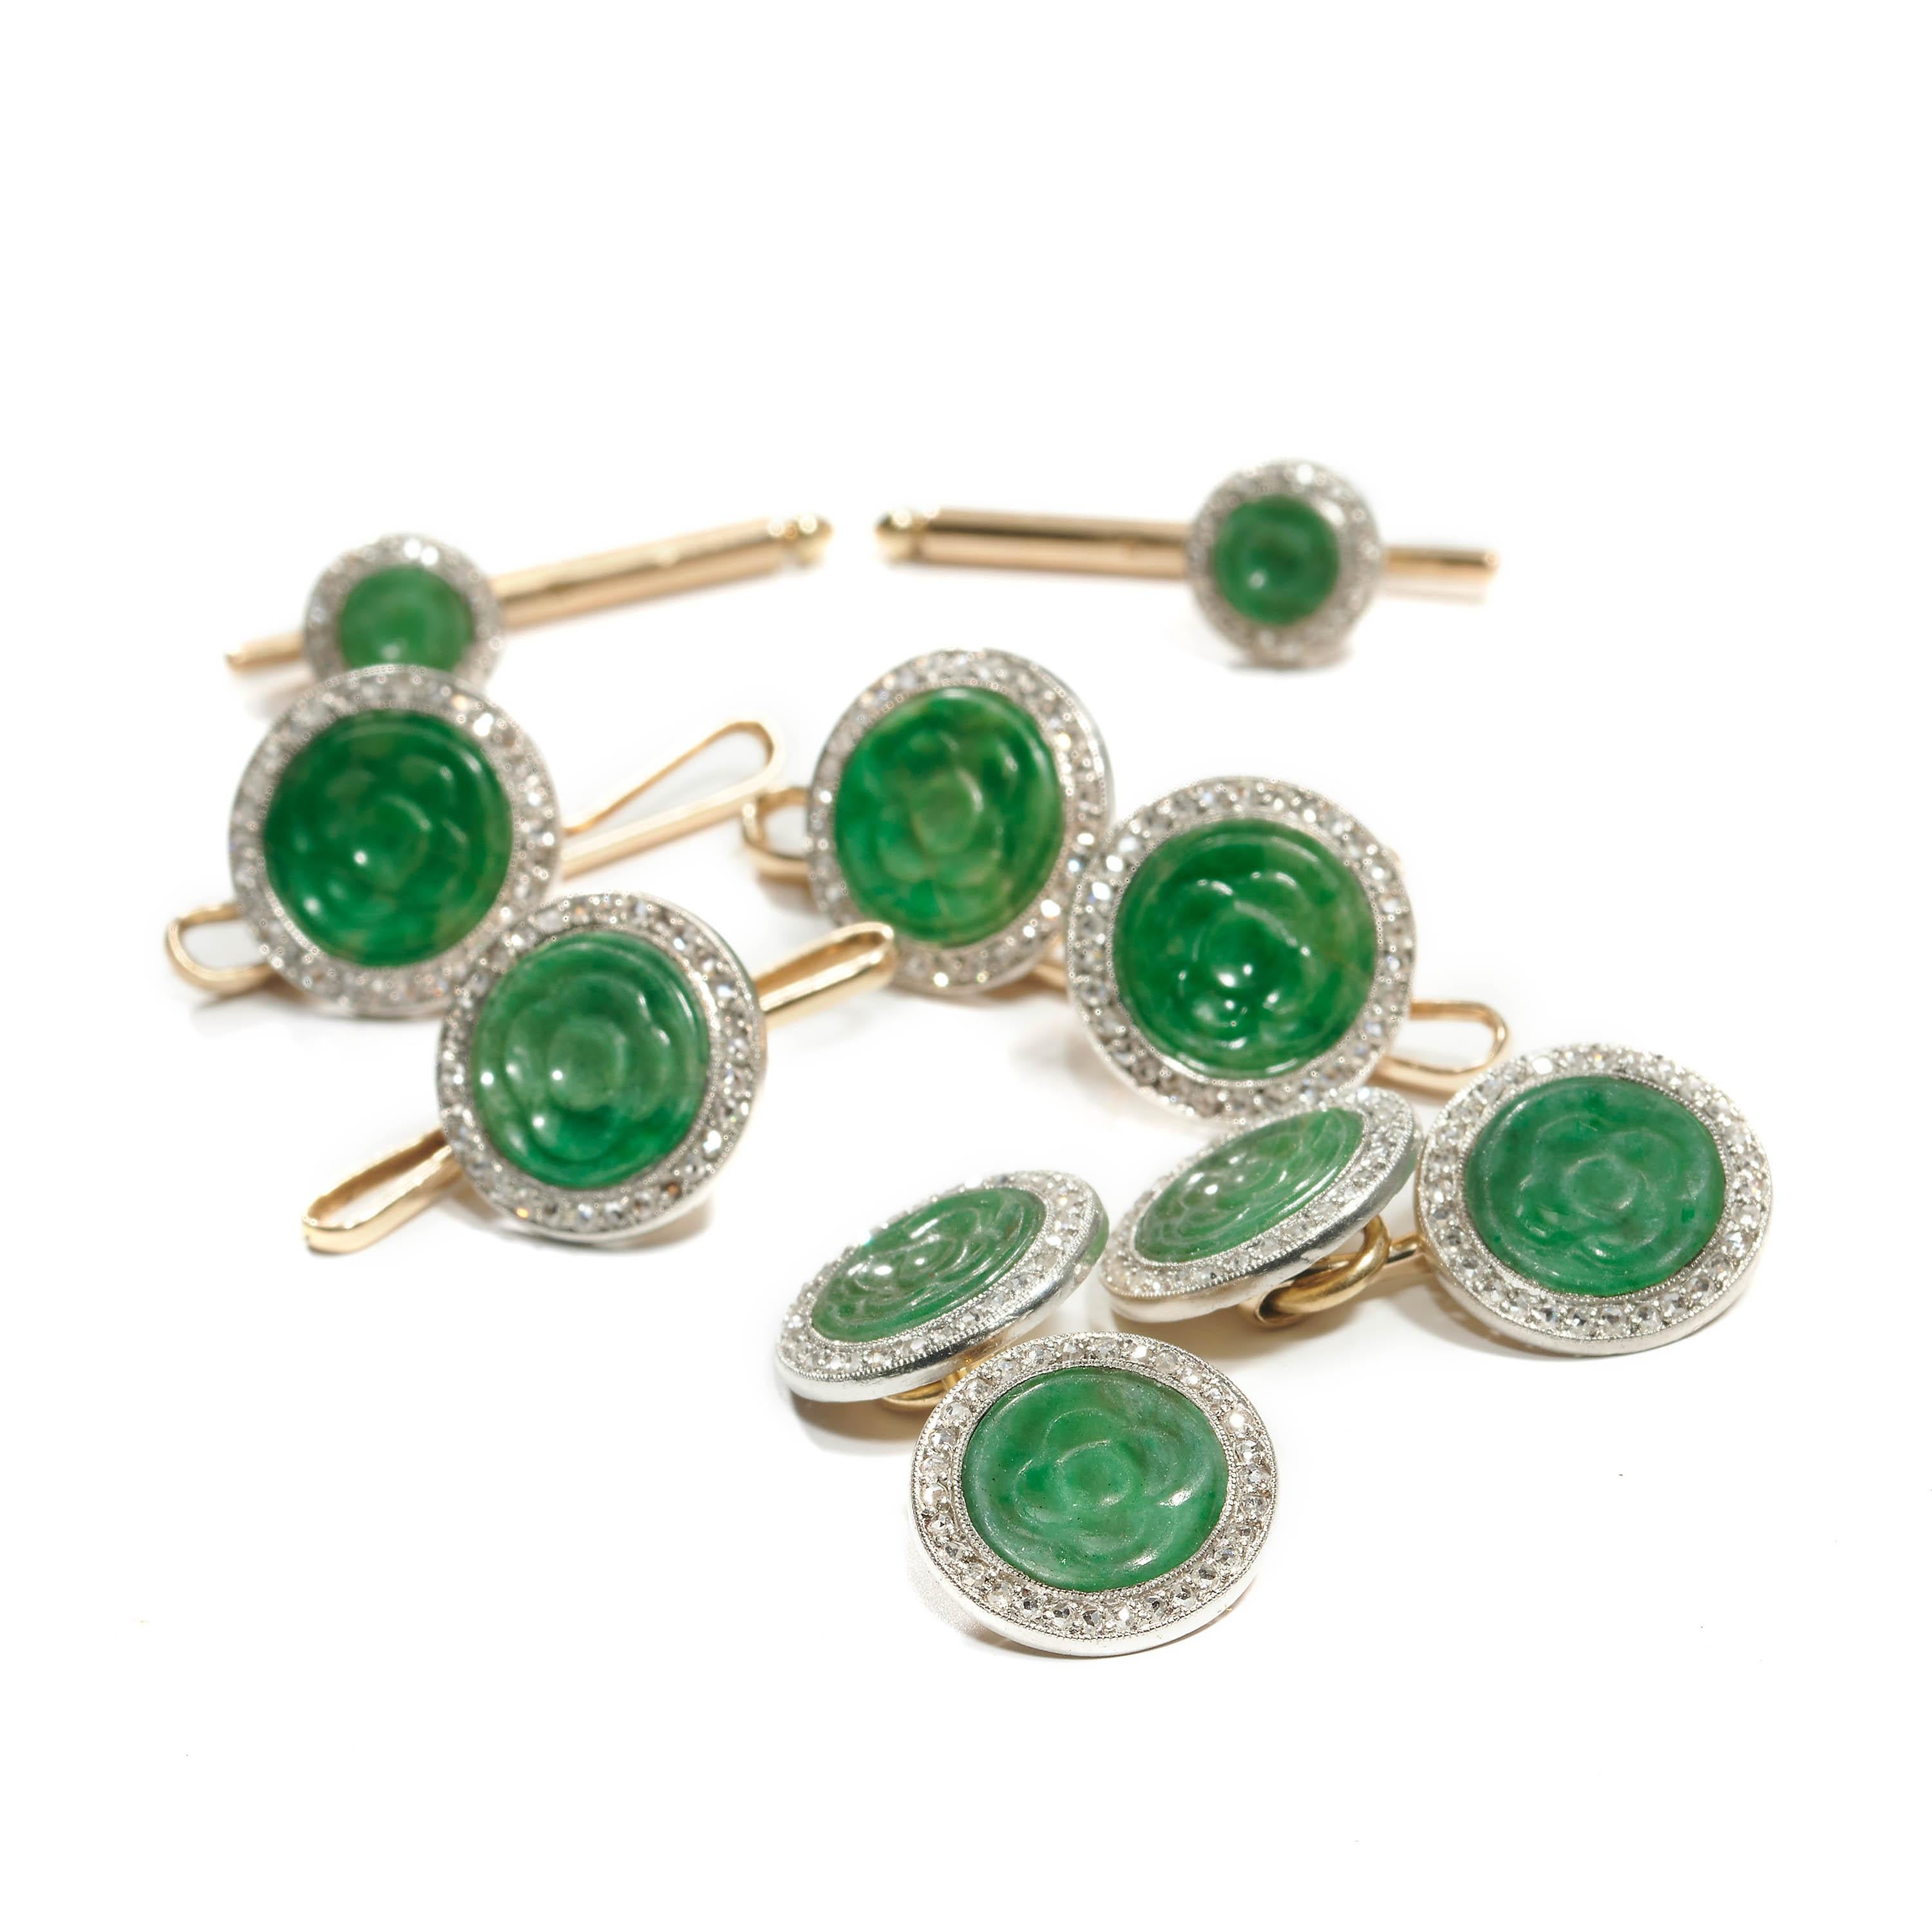 A vintage dress-set comprised of a pair of round cuffinks, four buttons and two collar studs, set with jadeite jade which has been carved to represent a lotus flower, surrounded by a border of old-cut diamonds, mounted in silver and 18ct yellow